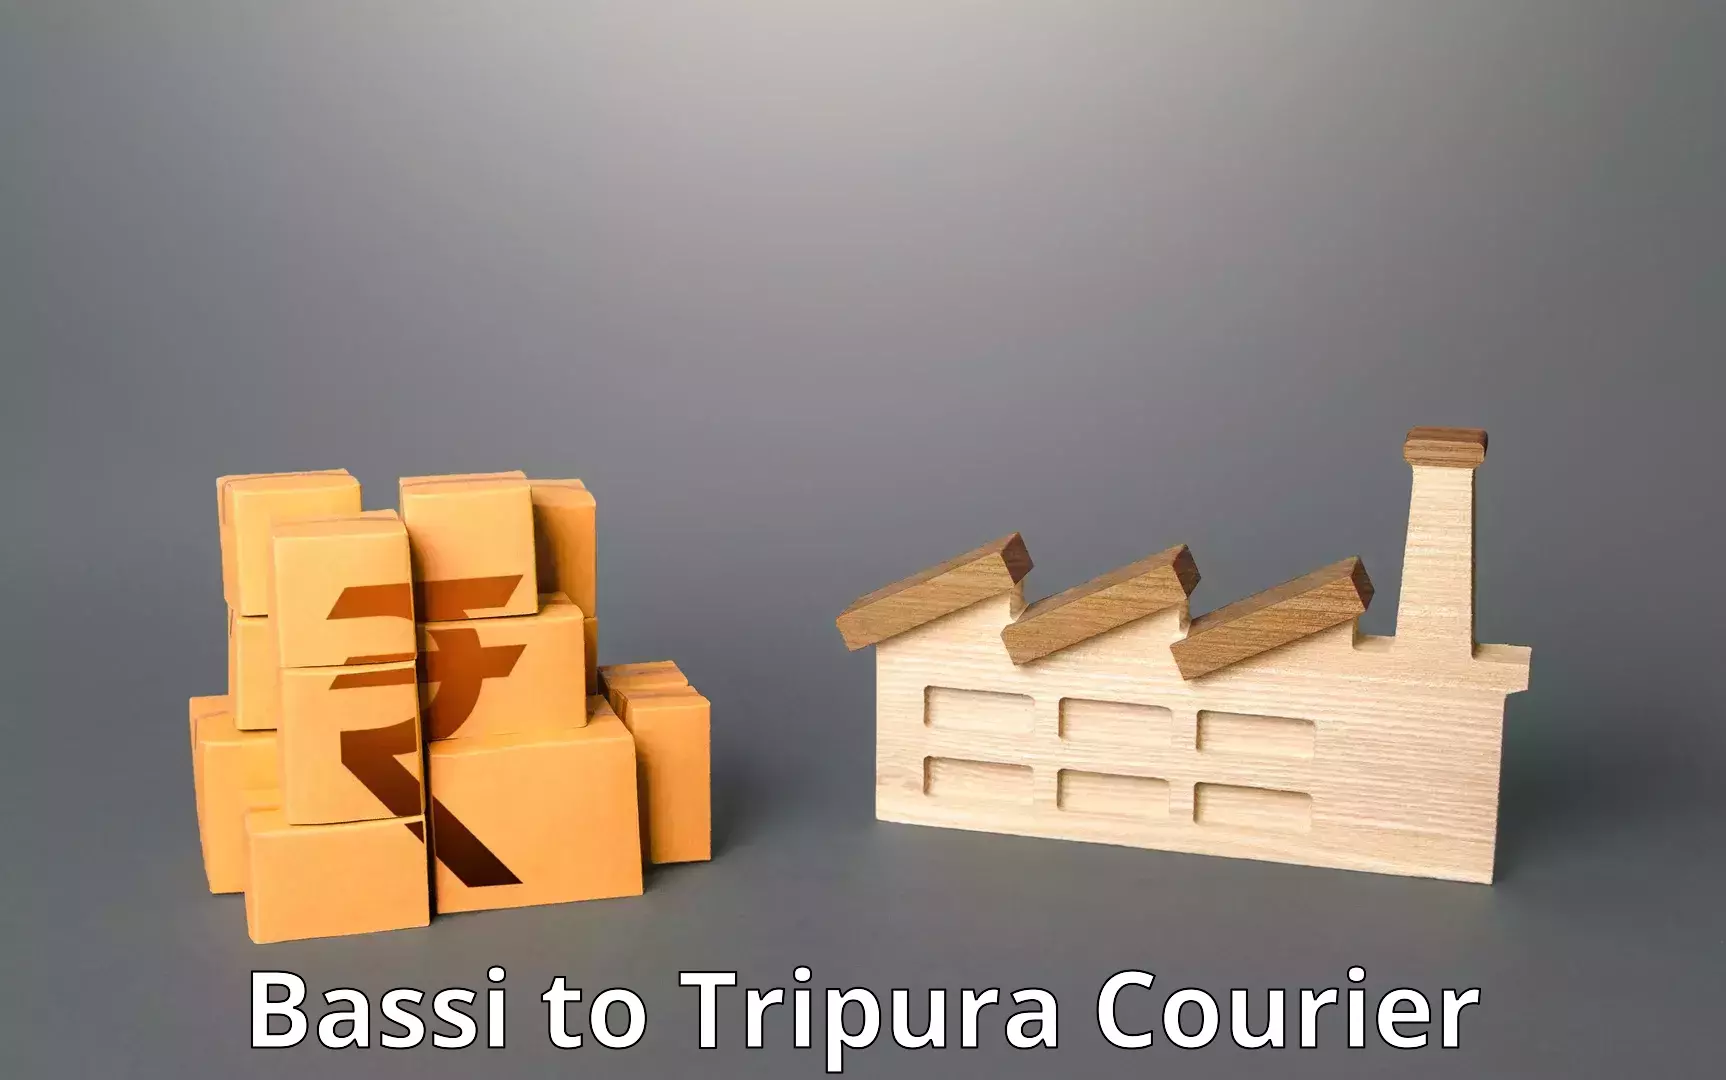 Full-service courier options Bassi to Tripura